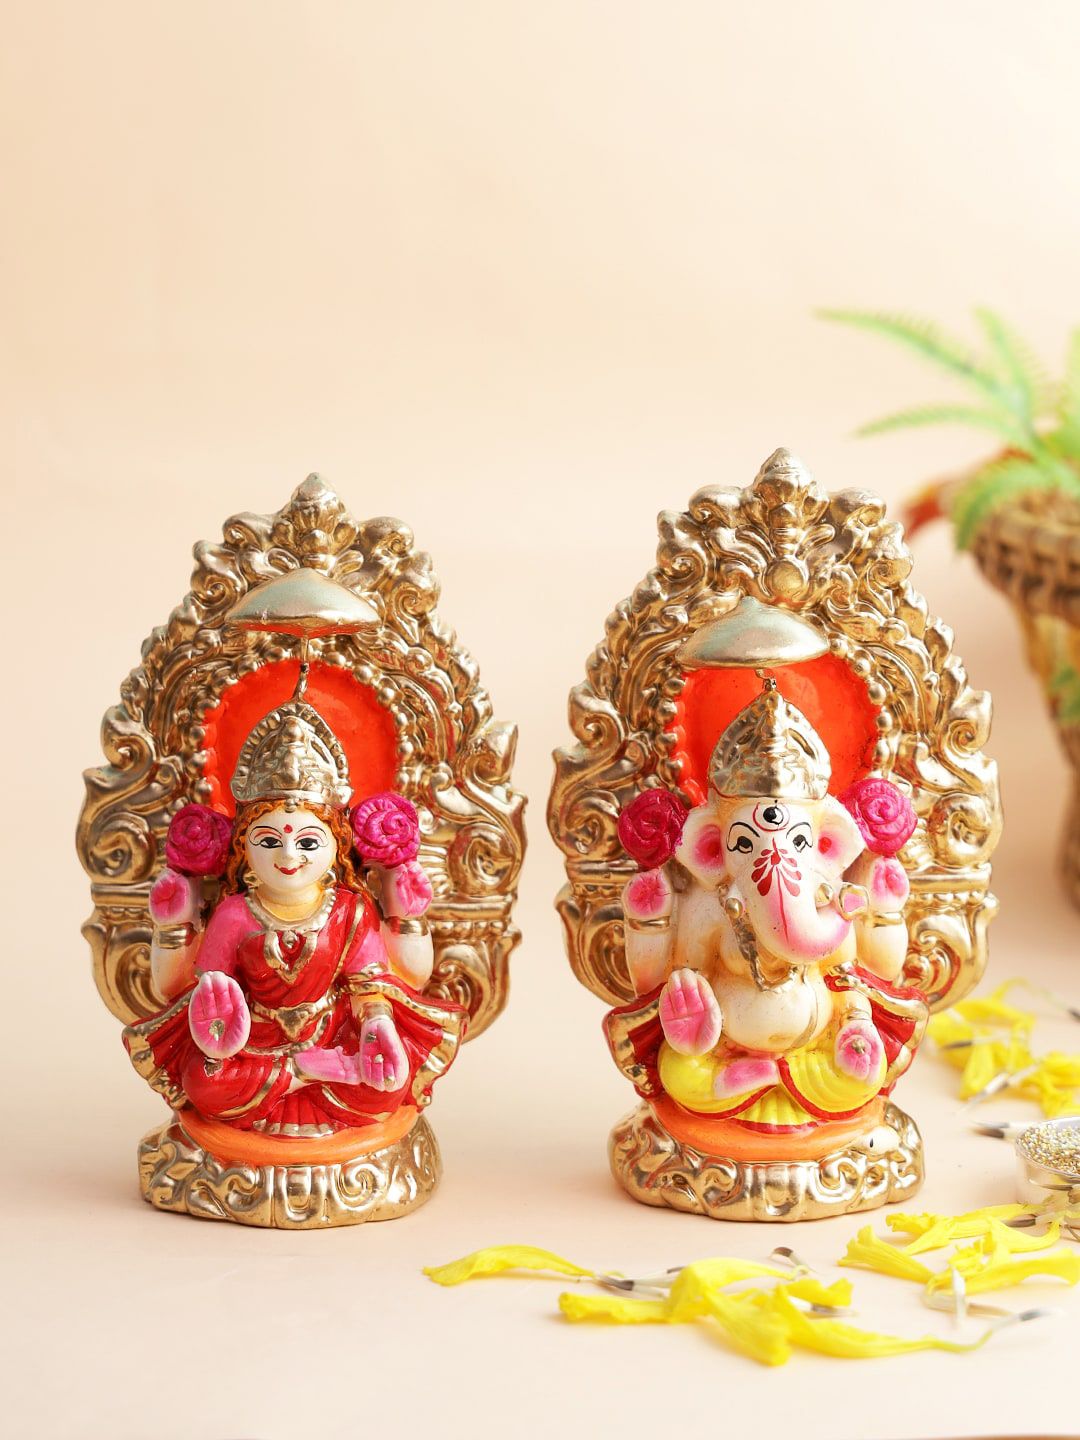 Aapno Rajasthan Gold-Colored Pink Handcrafted Laxmi Ganesh Idol set Price in India